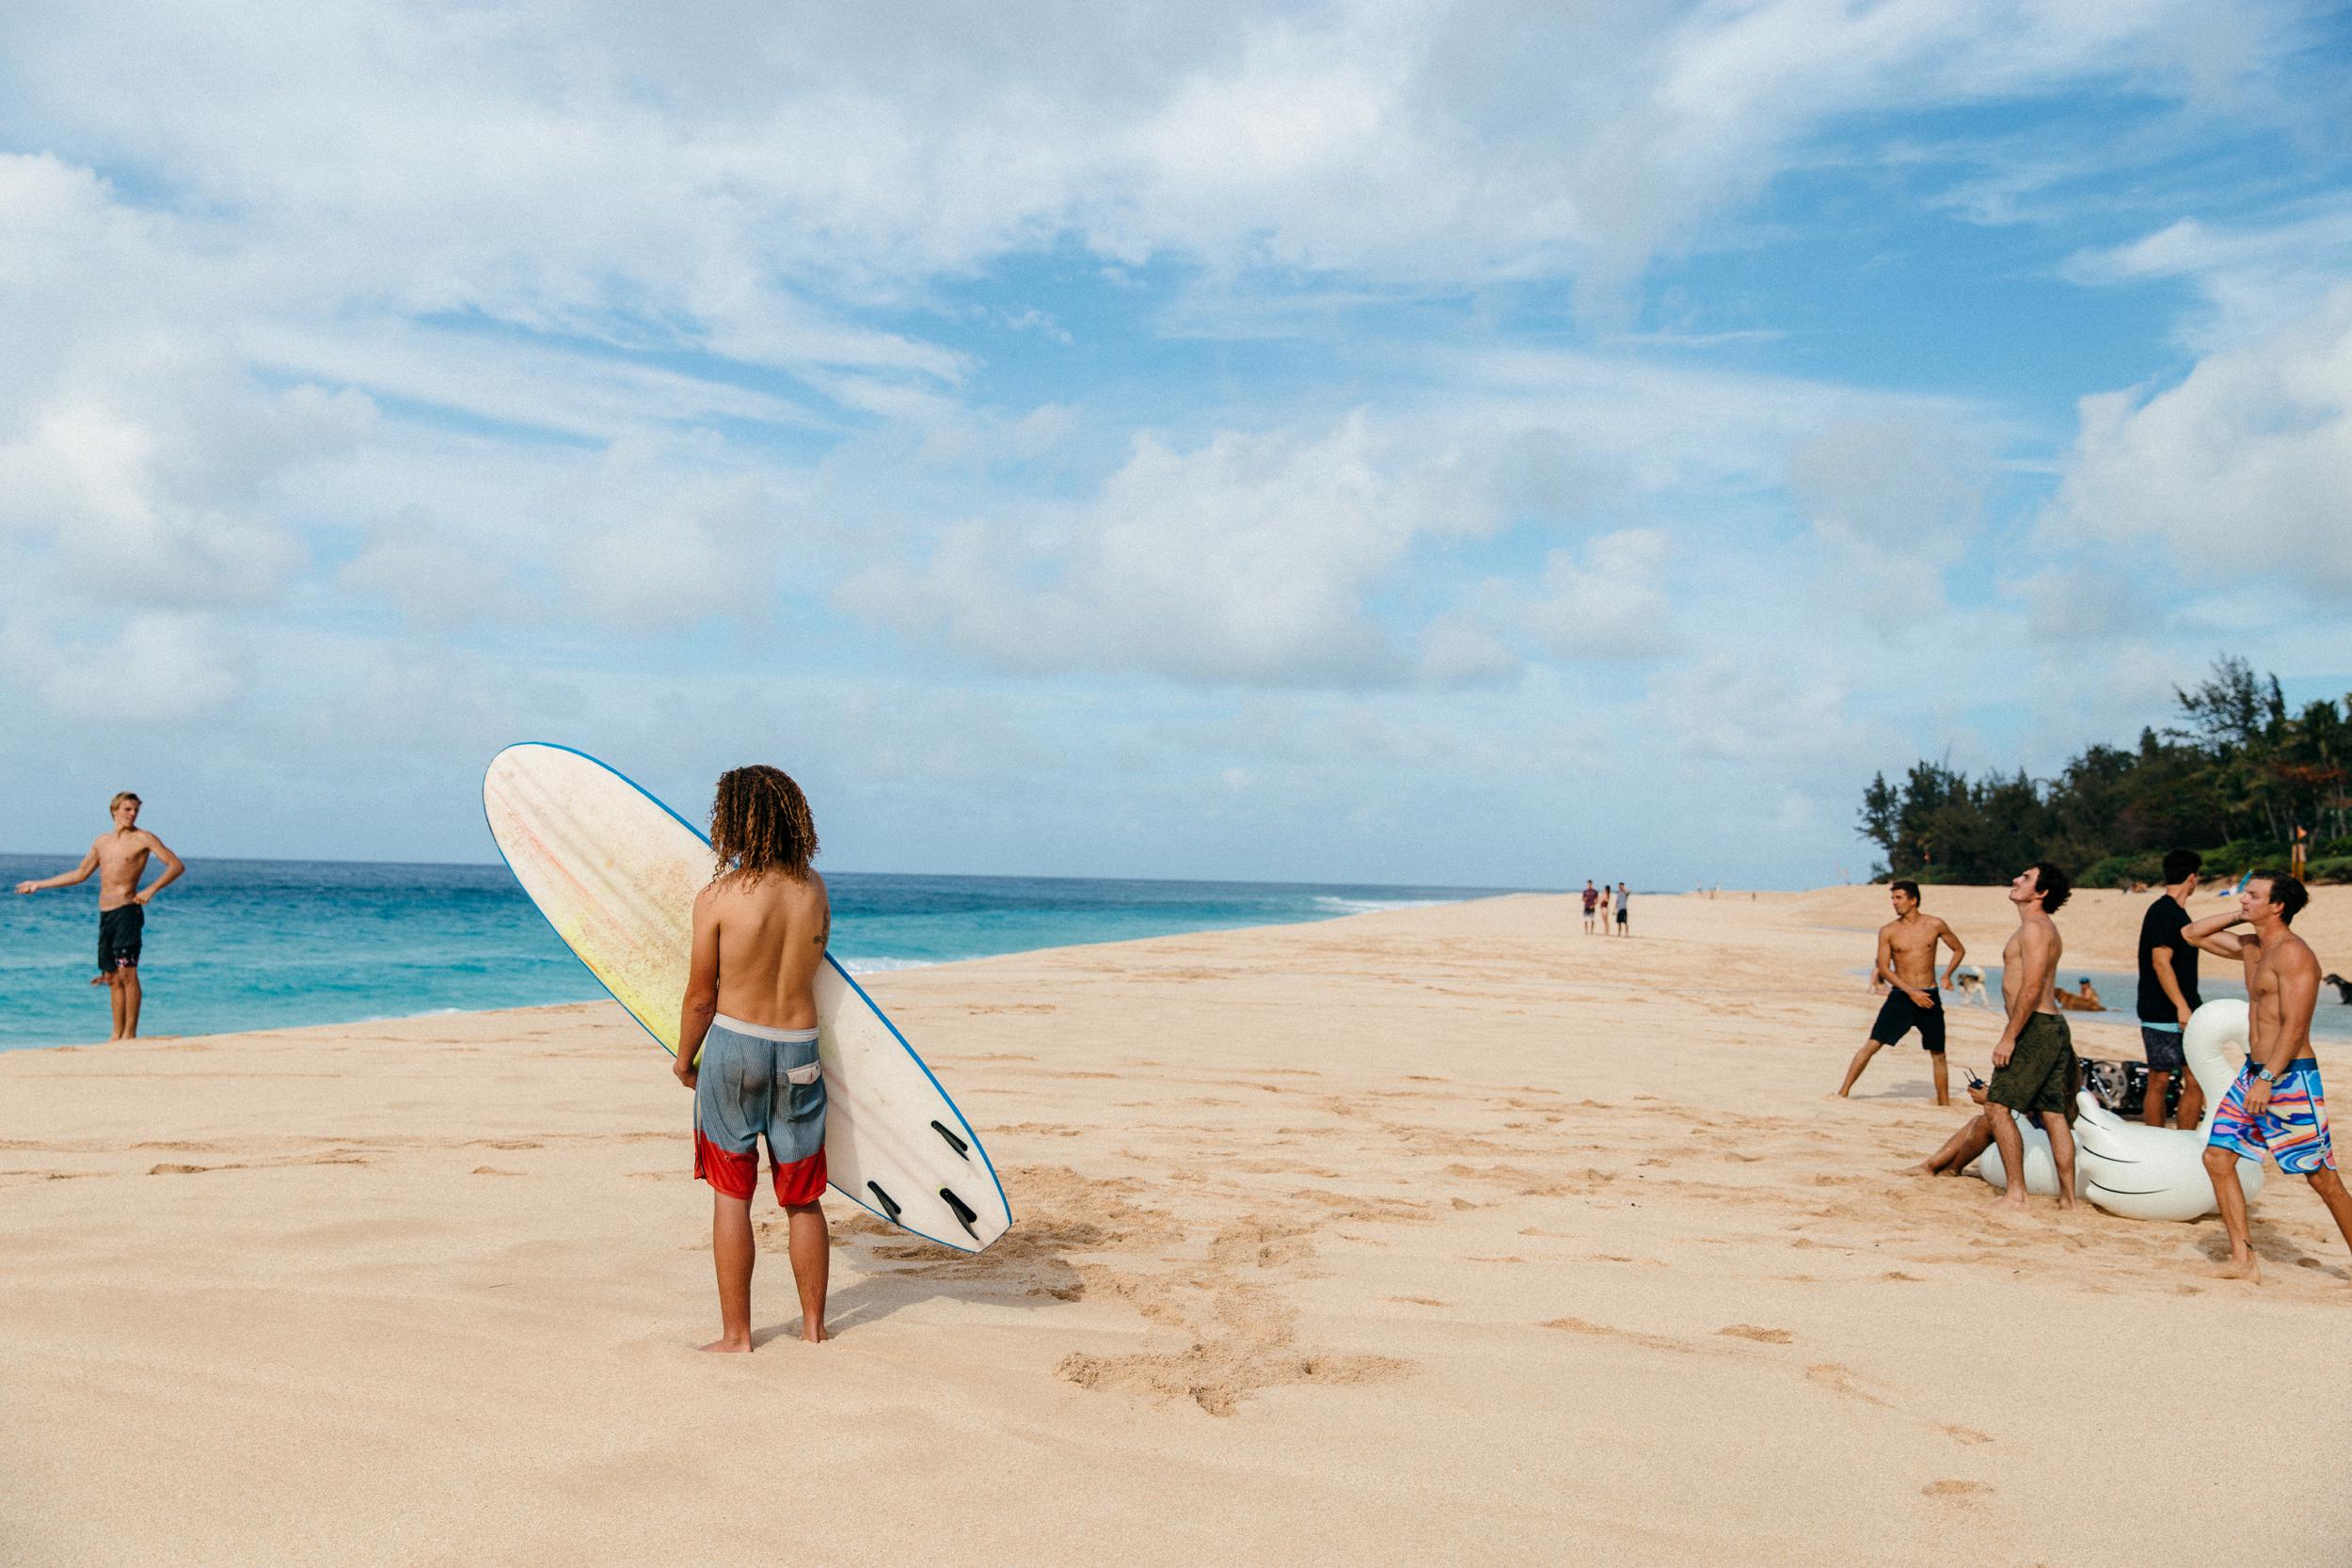 Oahu Documentary Photographs of Surfing, Hiking, Snorkeling